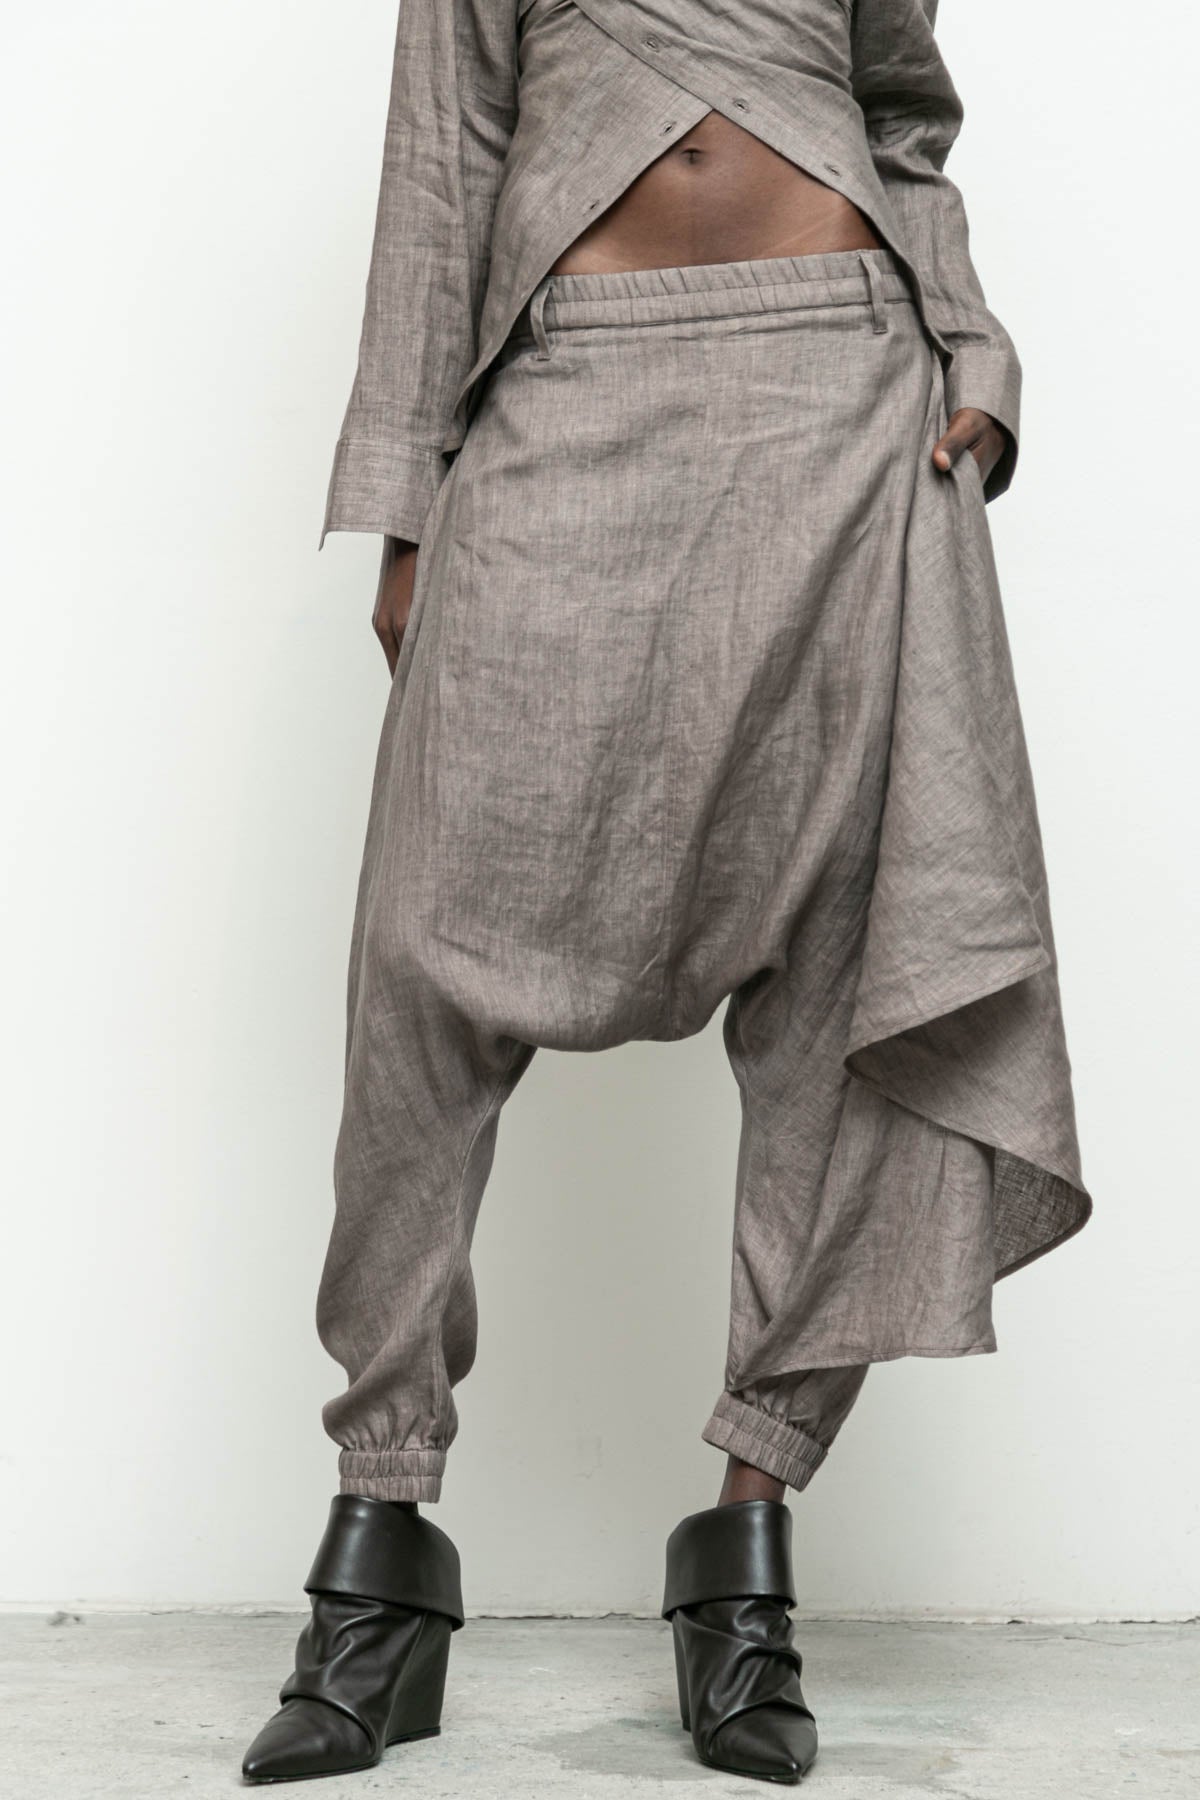 files/NicholasK-S-322A-WillowShirt-Taupe-P-303D-ImanPant-Taupe-09.jpg